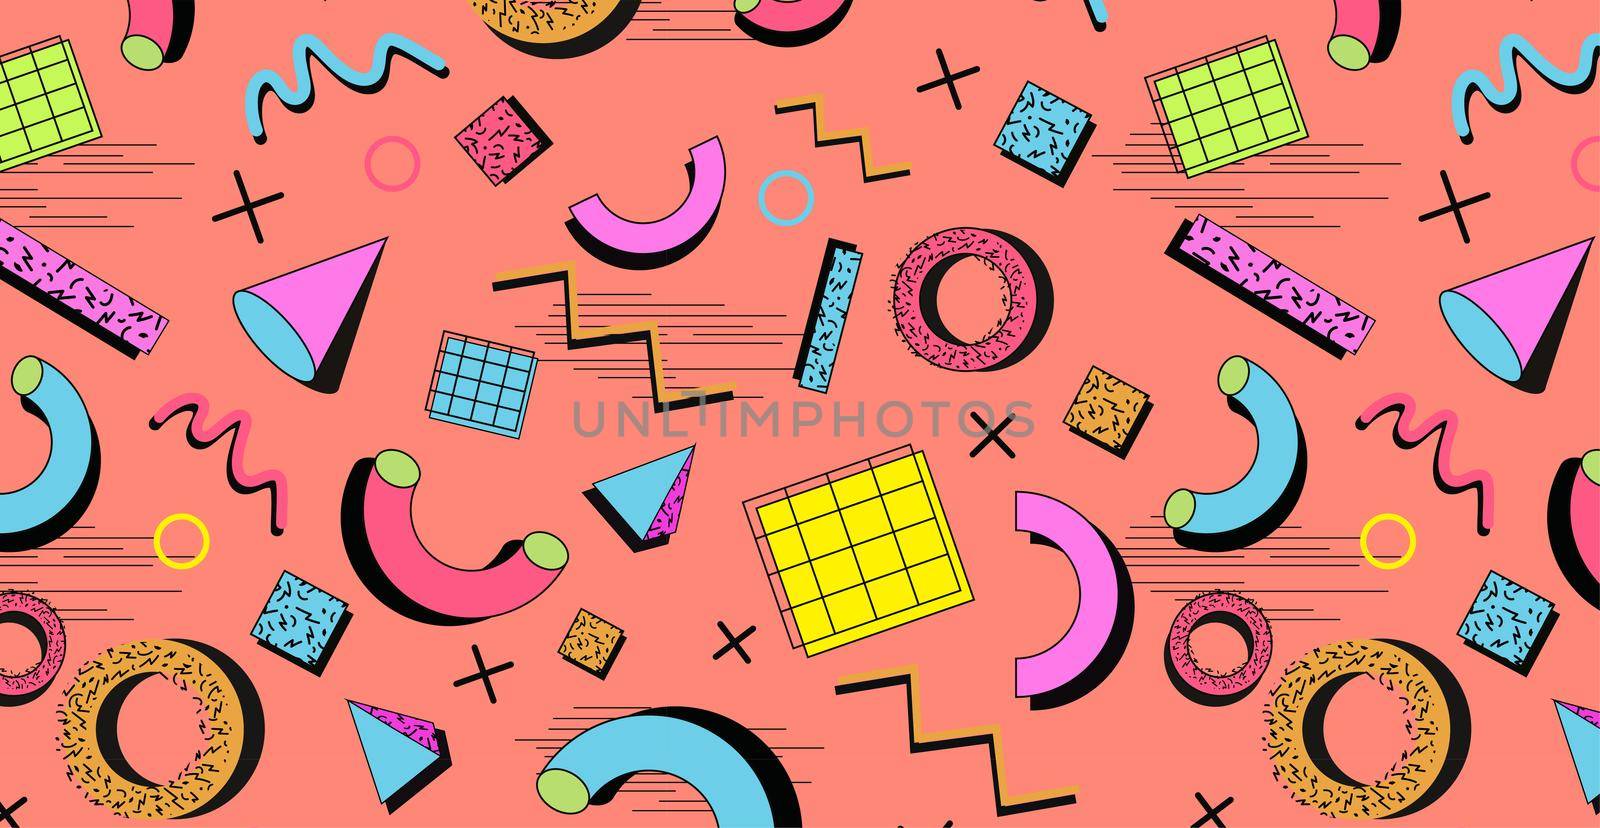 Memphis background, 80s-90s style patterns. Memphis fashion style. Colorful geometric pattern, different shapes of color style.